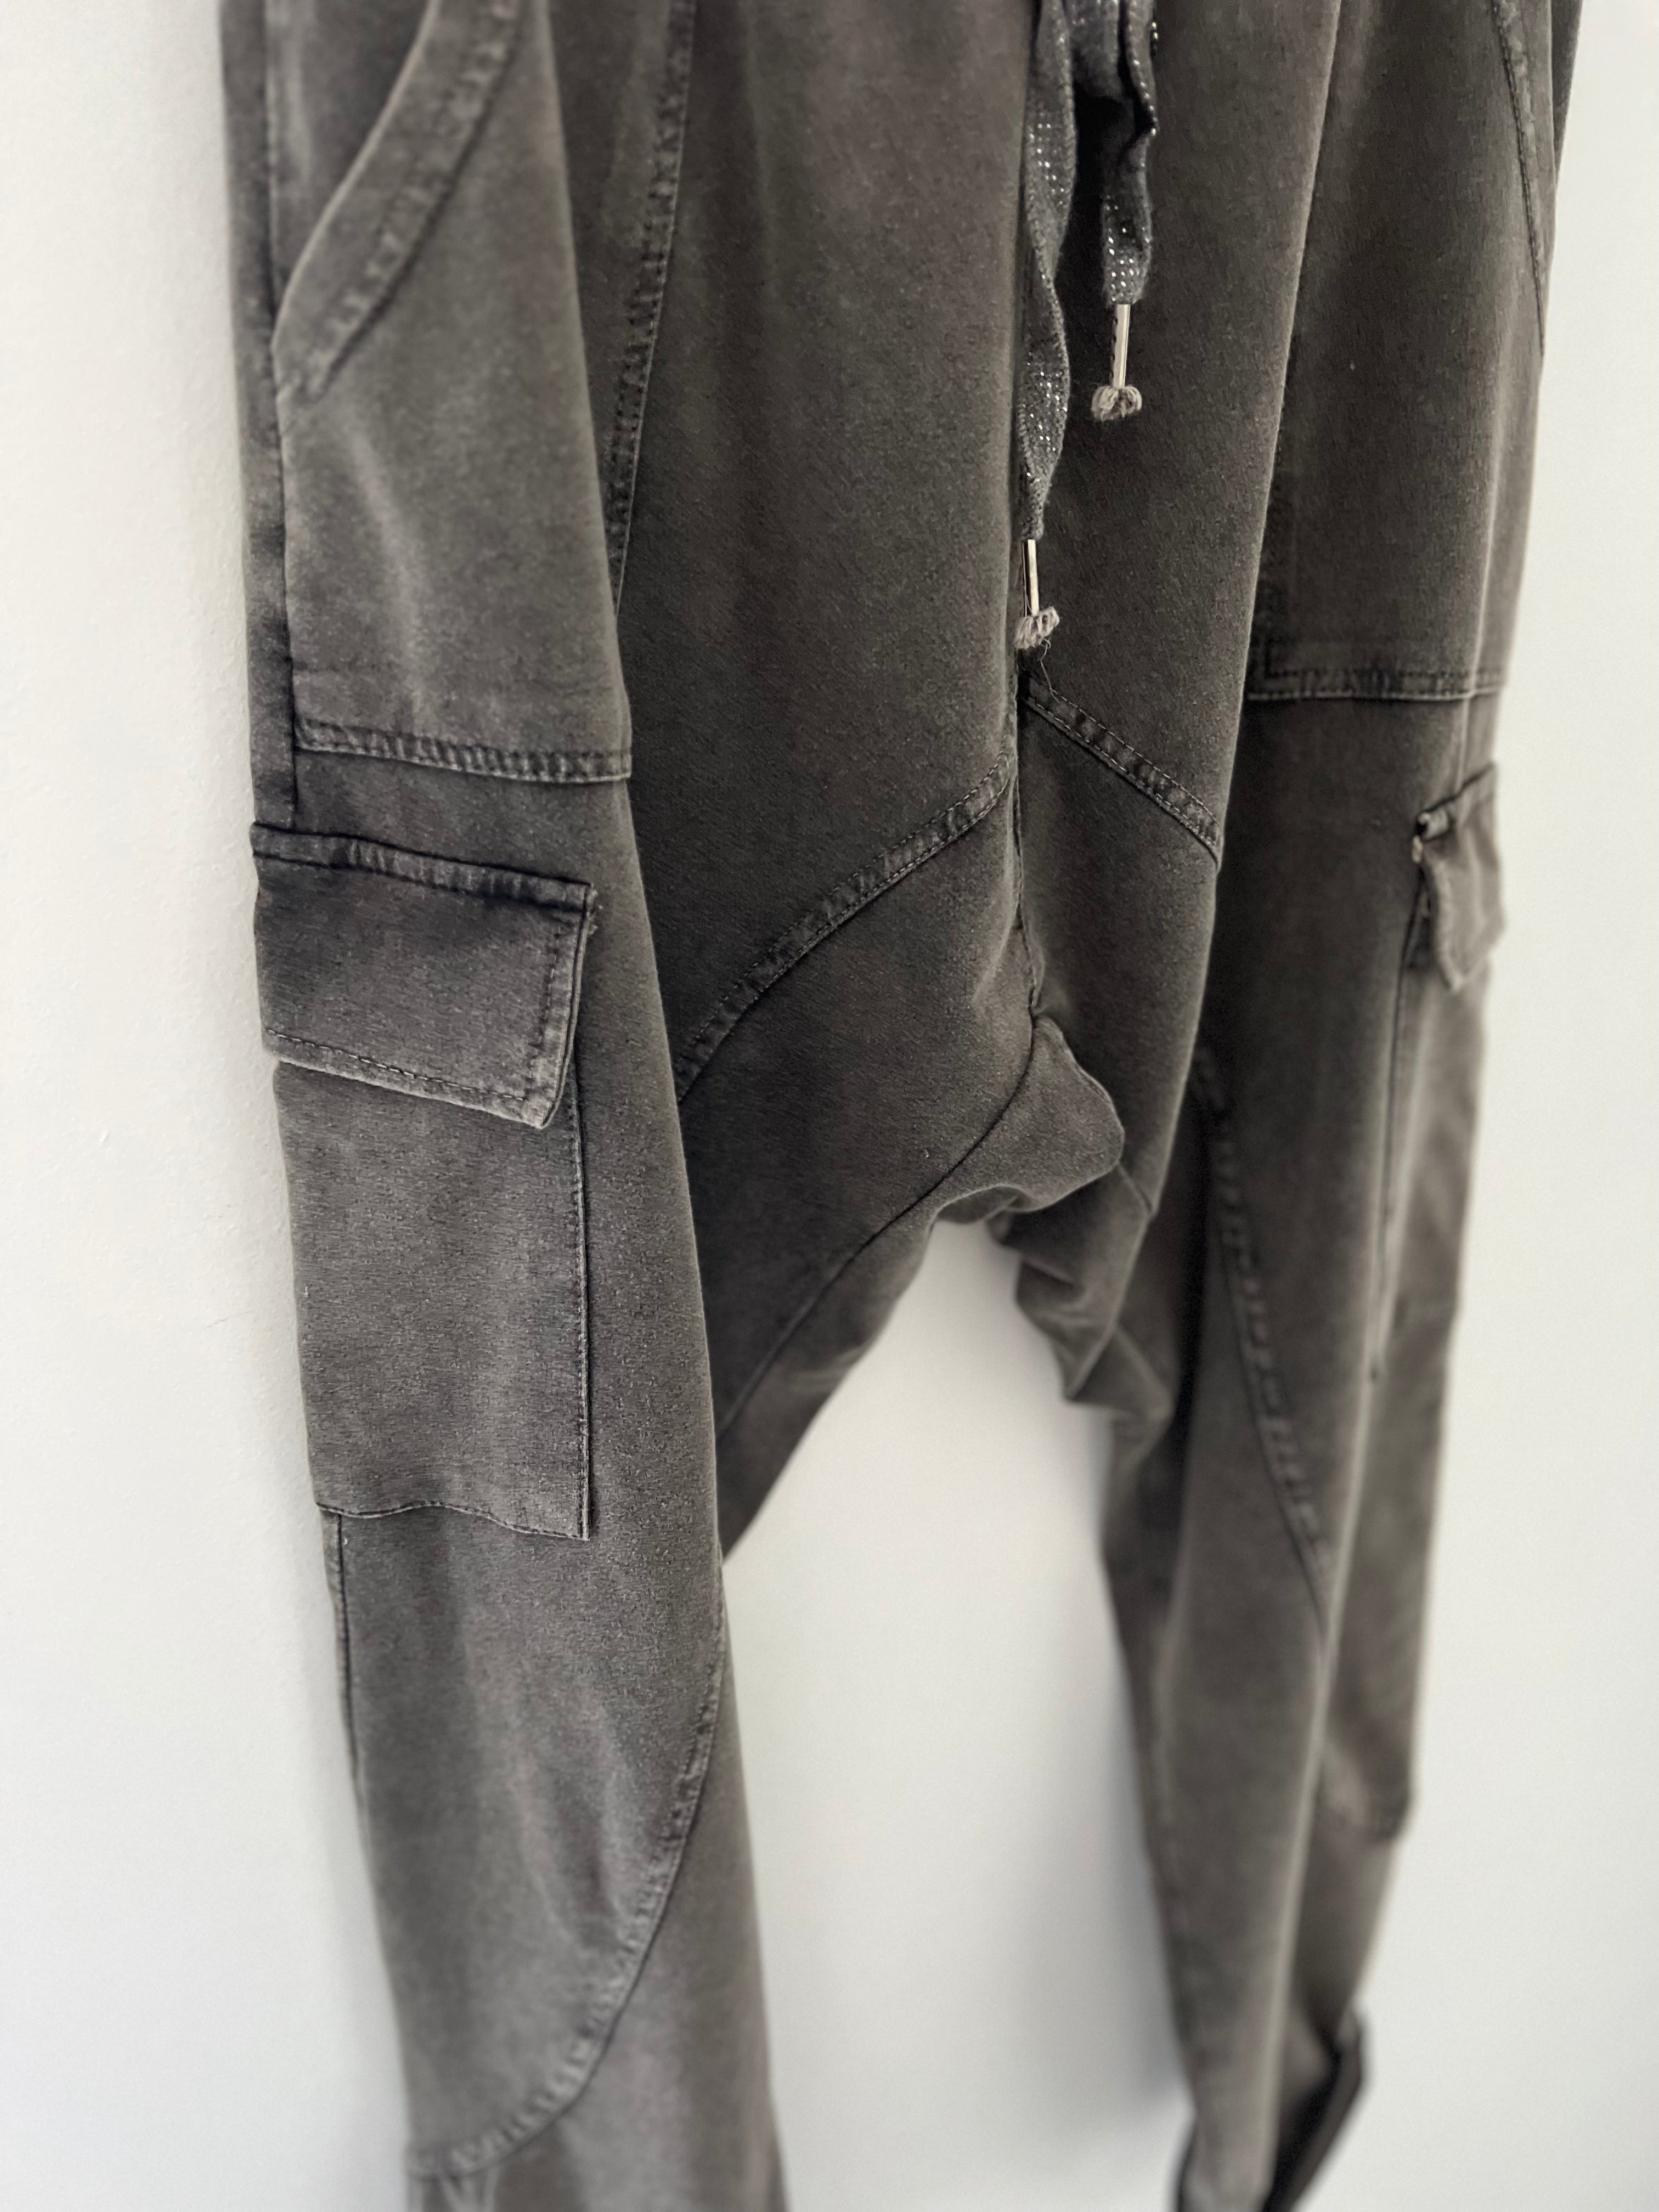 Jersey Stretchy Harem Joggers in Washed Charcoal